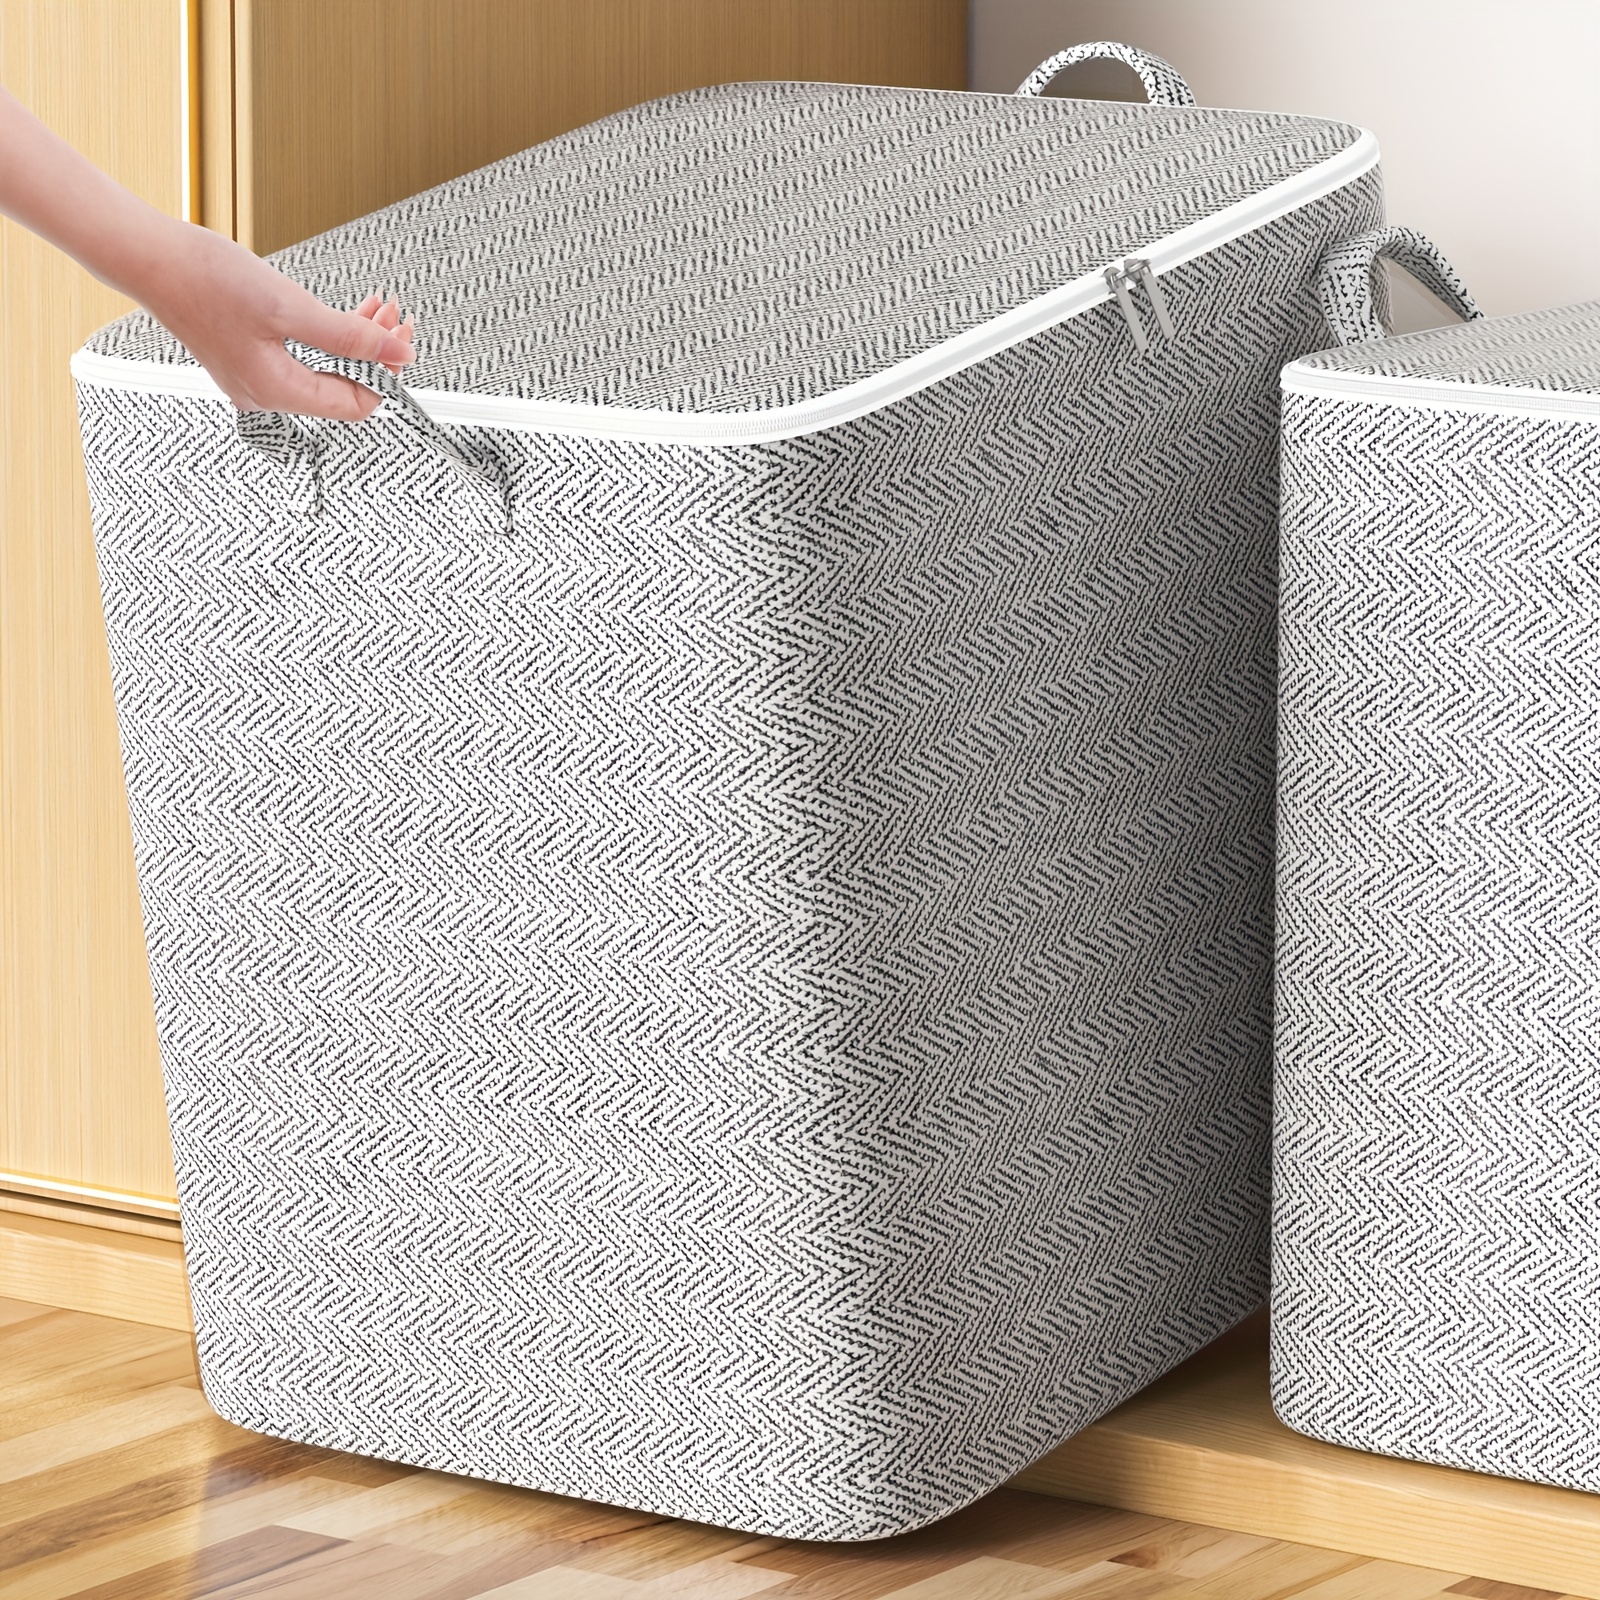 Large-capacity Storage Bag Quilt Clothing Storage Bag Non-woven